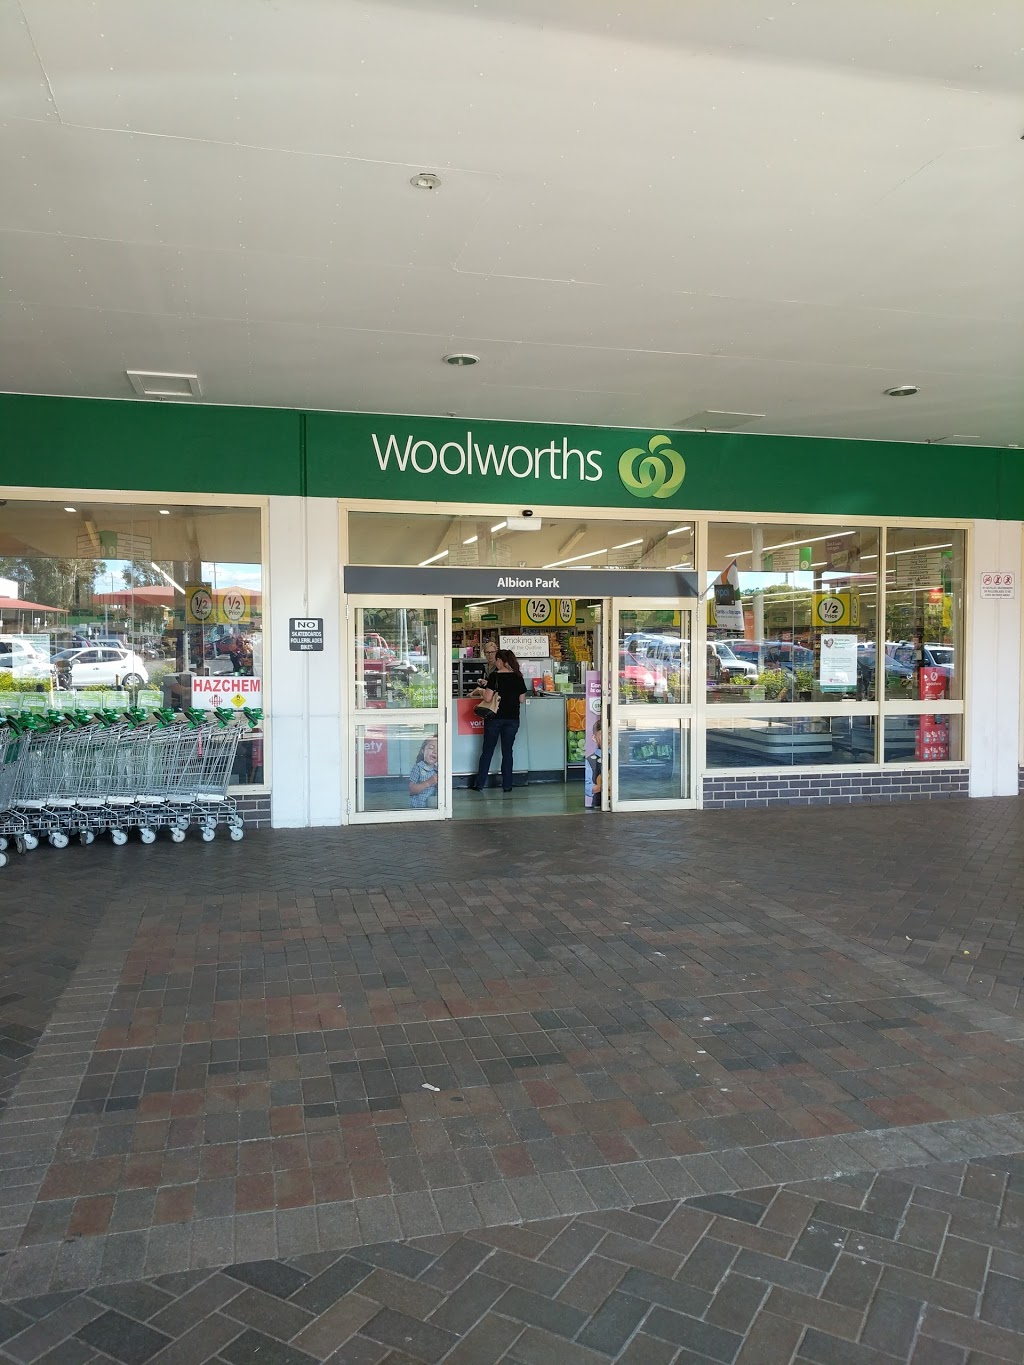 Woolworths Albion Park (Russell St) Opening Hours